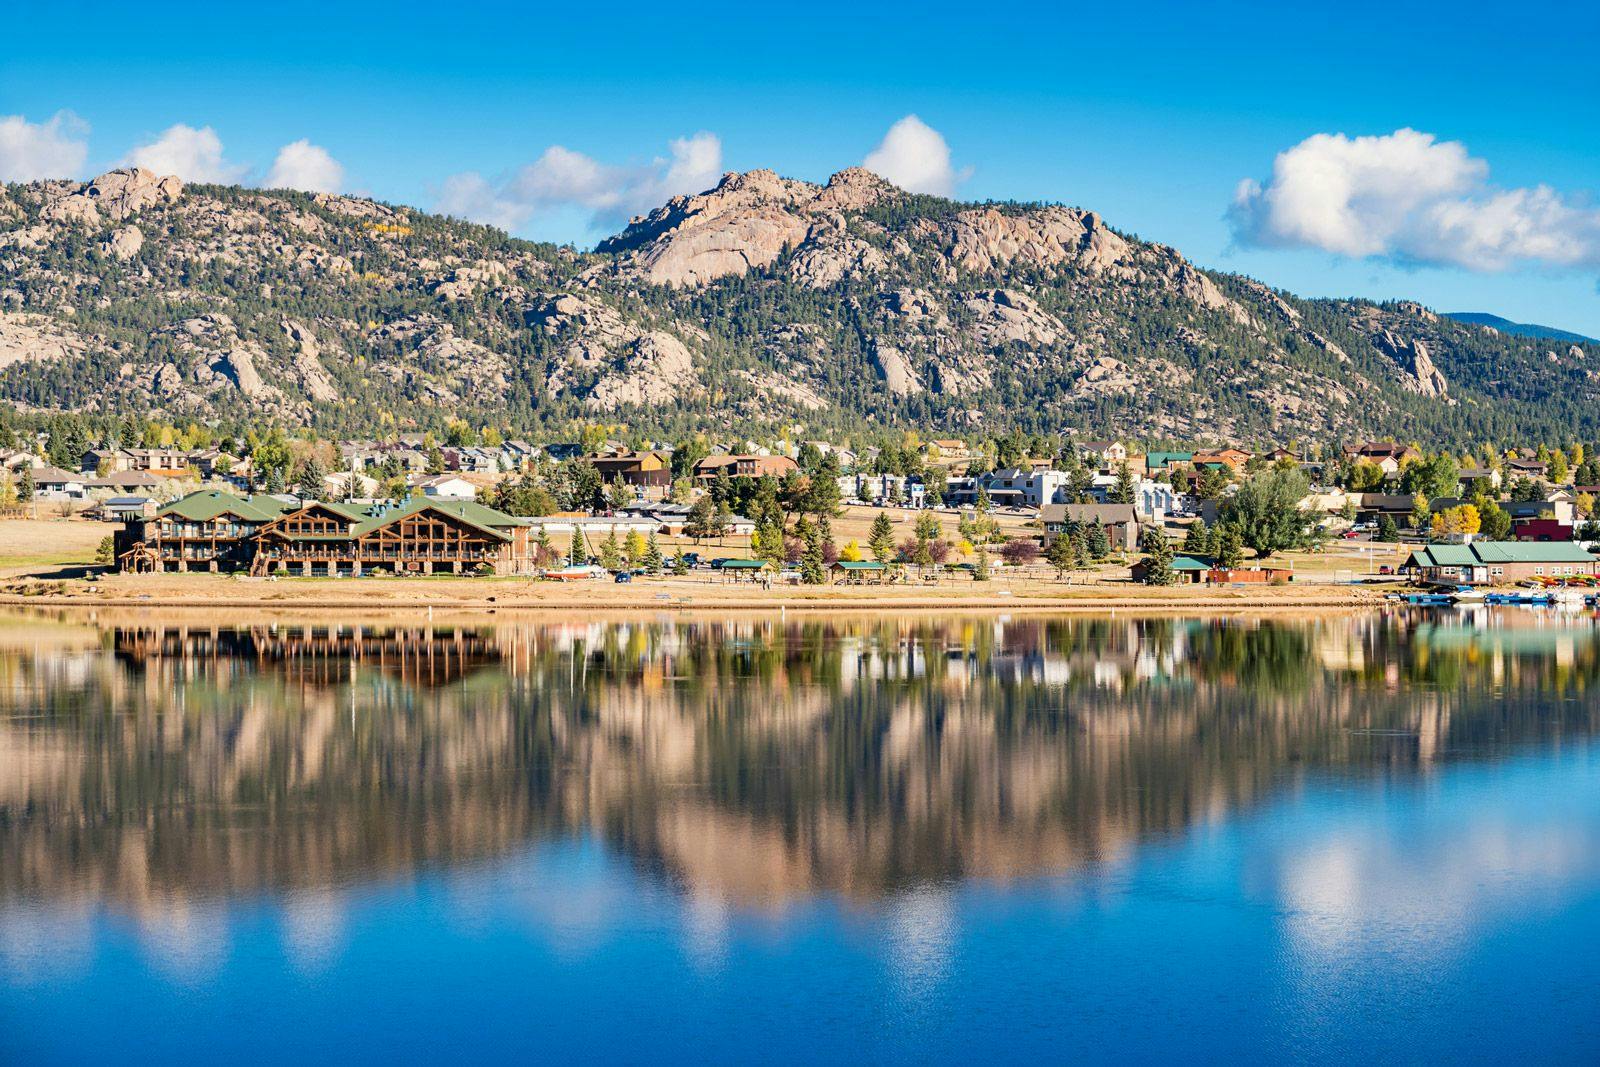 Estes Park town with mountains behind and a still lake in front